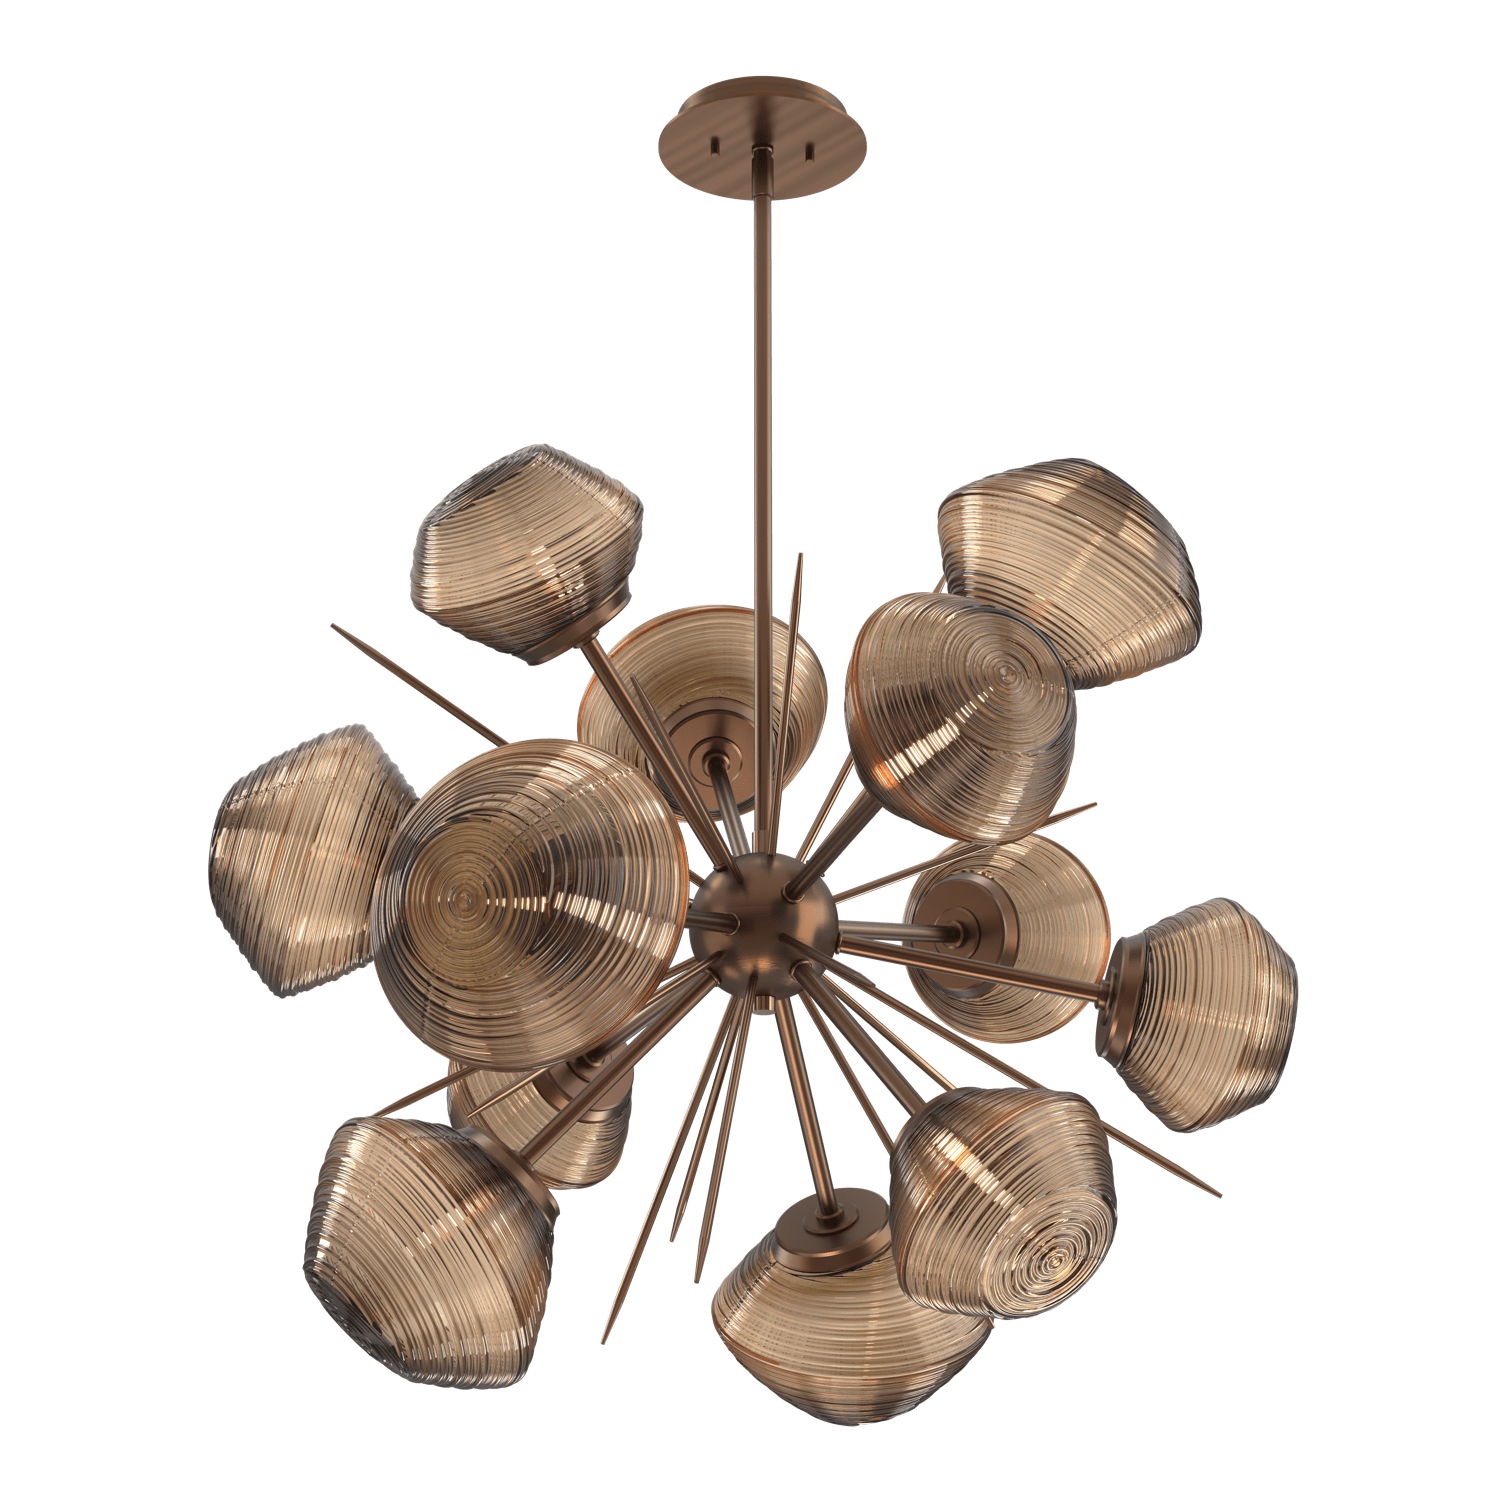 CHB0089-0G-RB-B-Hammerton-Studio-Mesa-36-inch-starburst-chandelier-with-oil-rubbed-bronze-finish-and-bronze-blown-glass-shades-and-LED-lamping